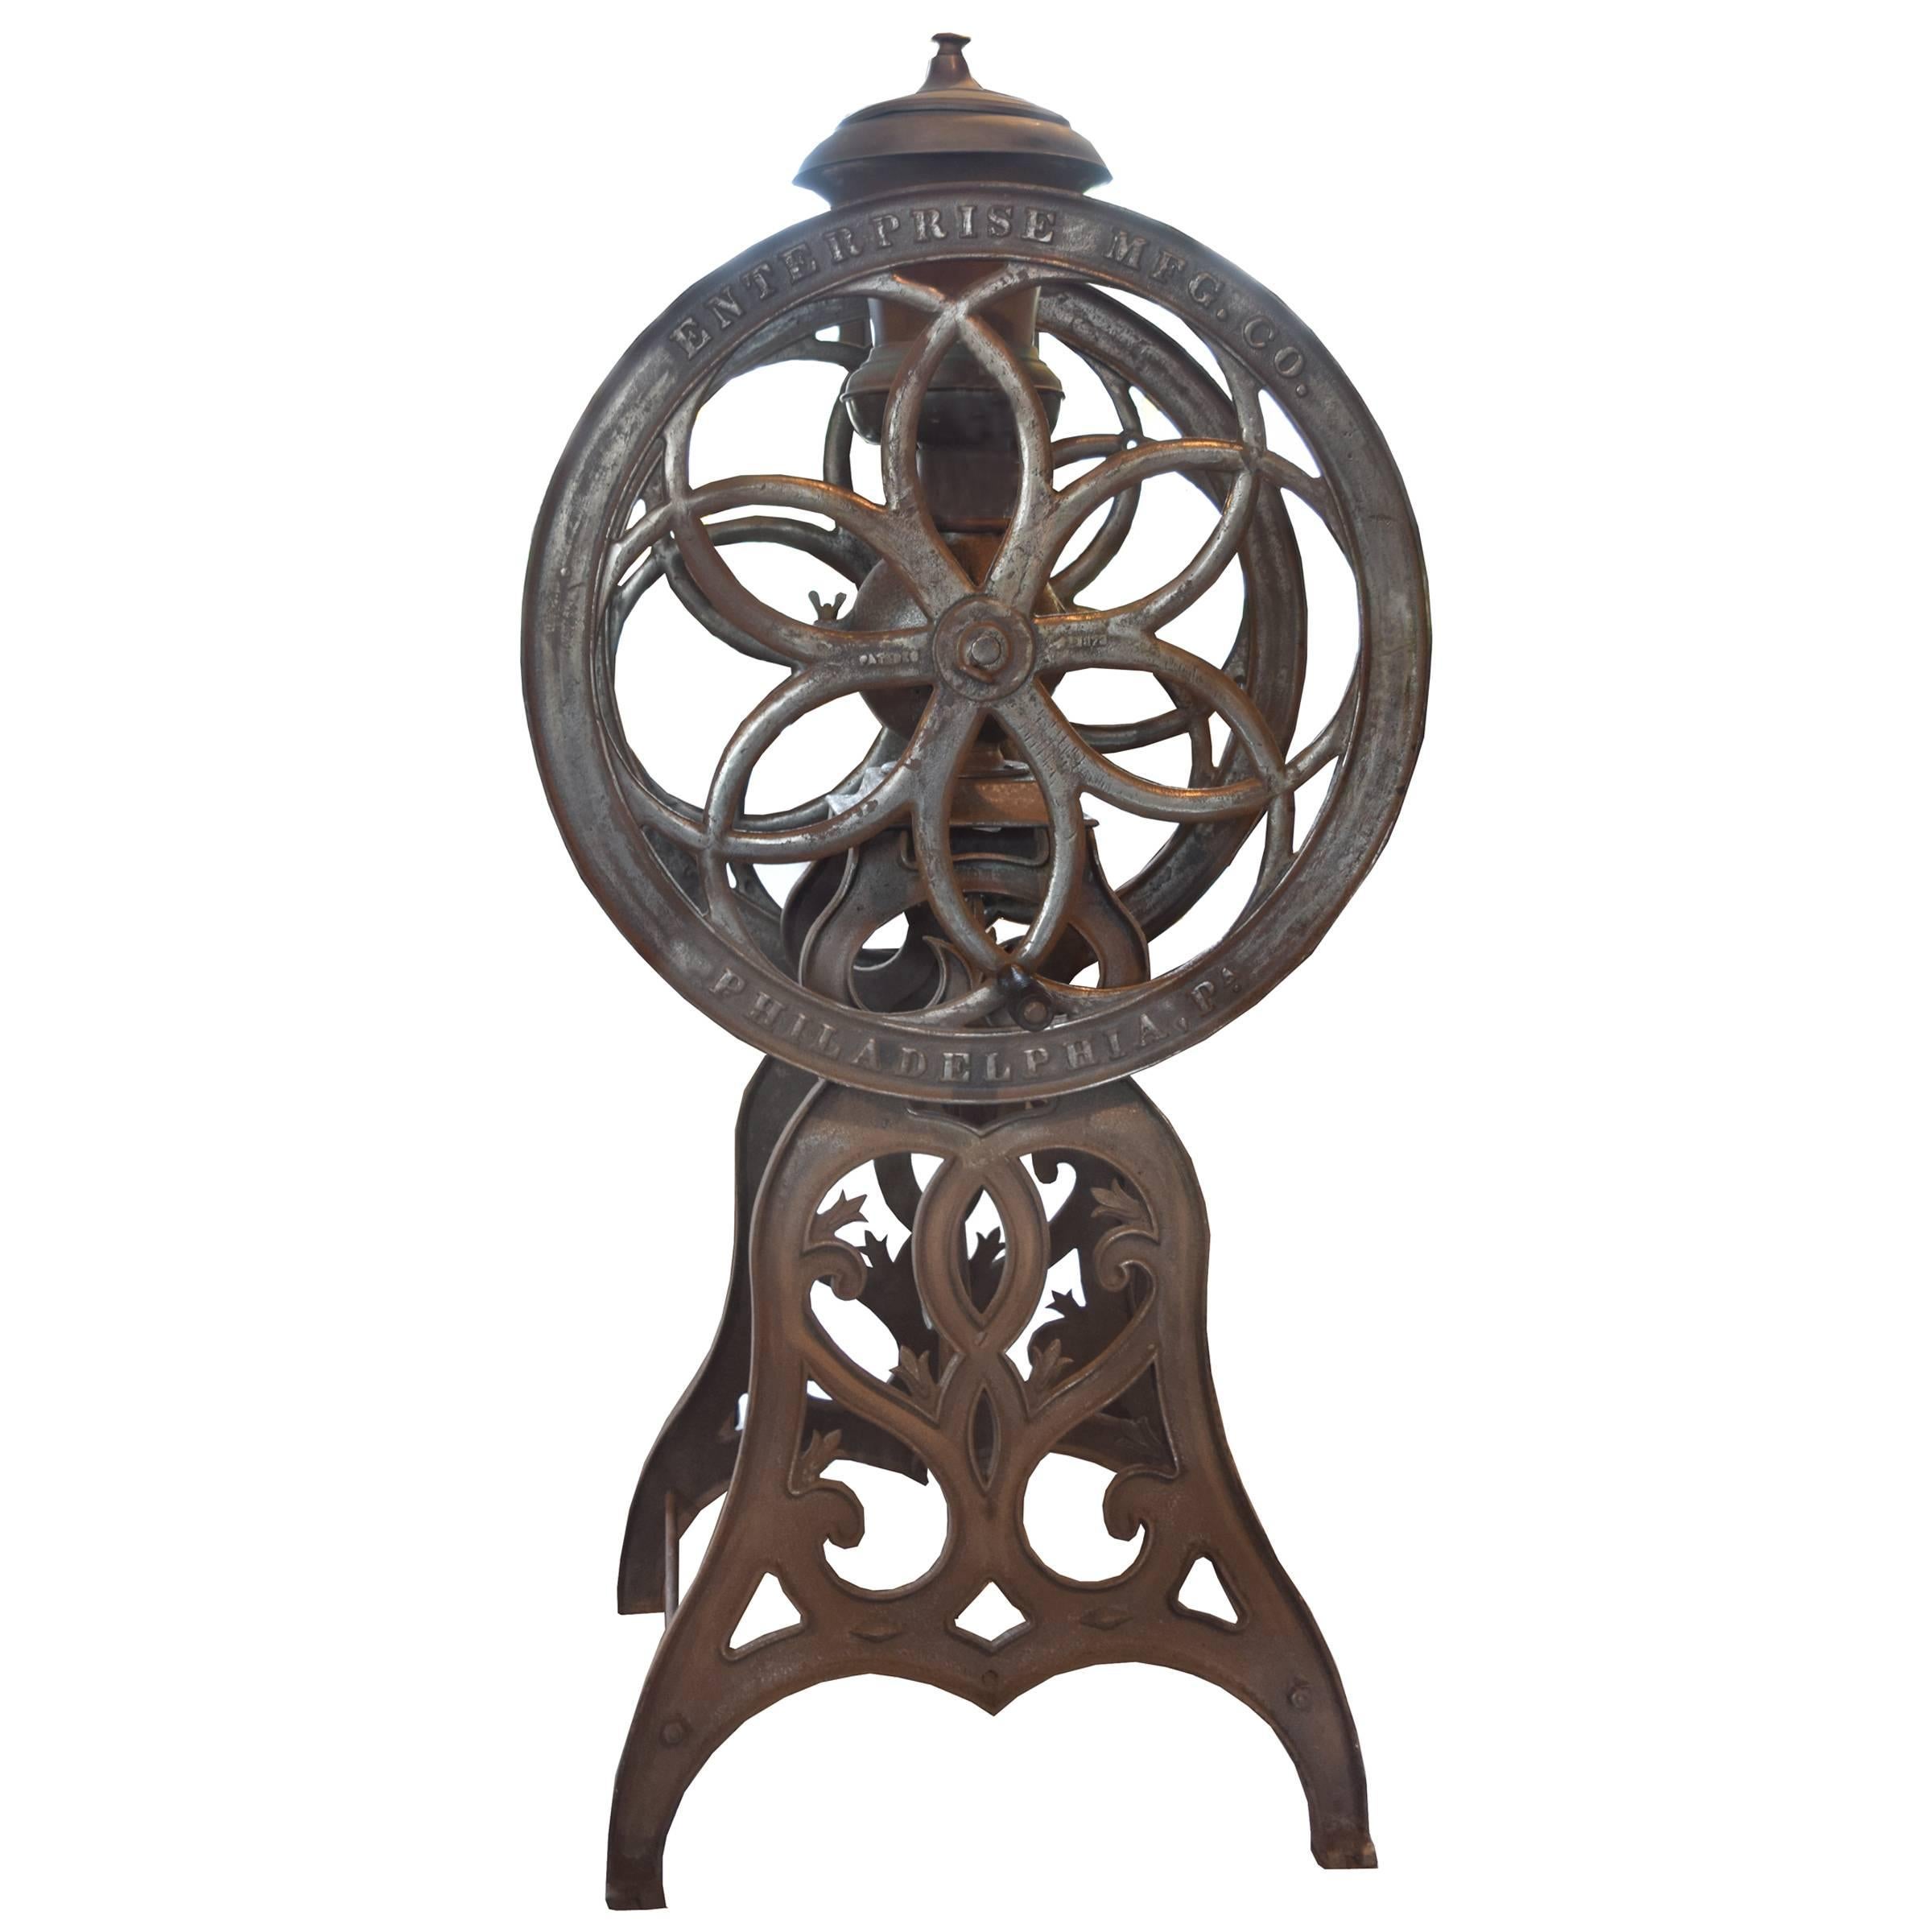 Cast Iron Coffee Grinder by Enterprise Manufacturing Co.